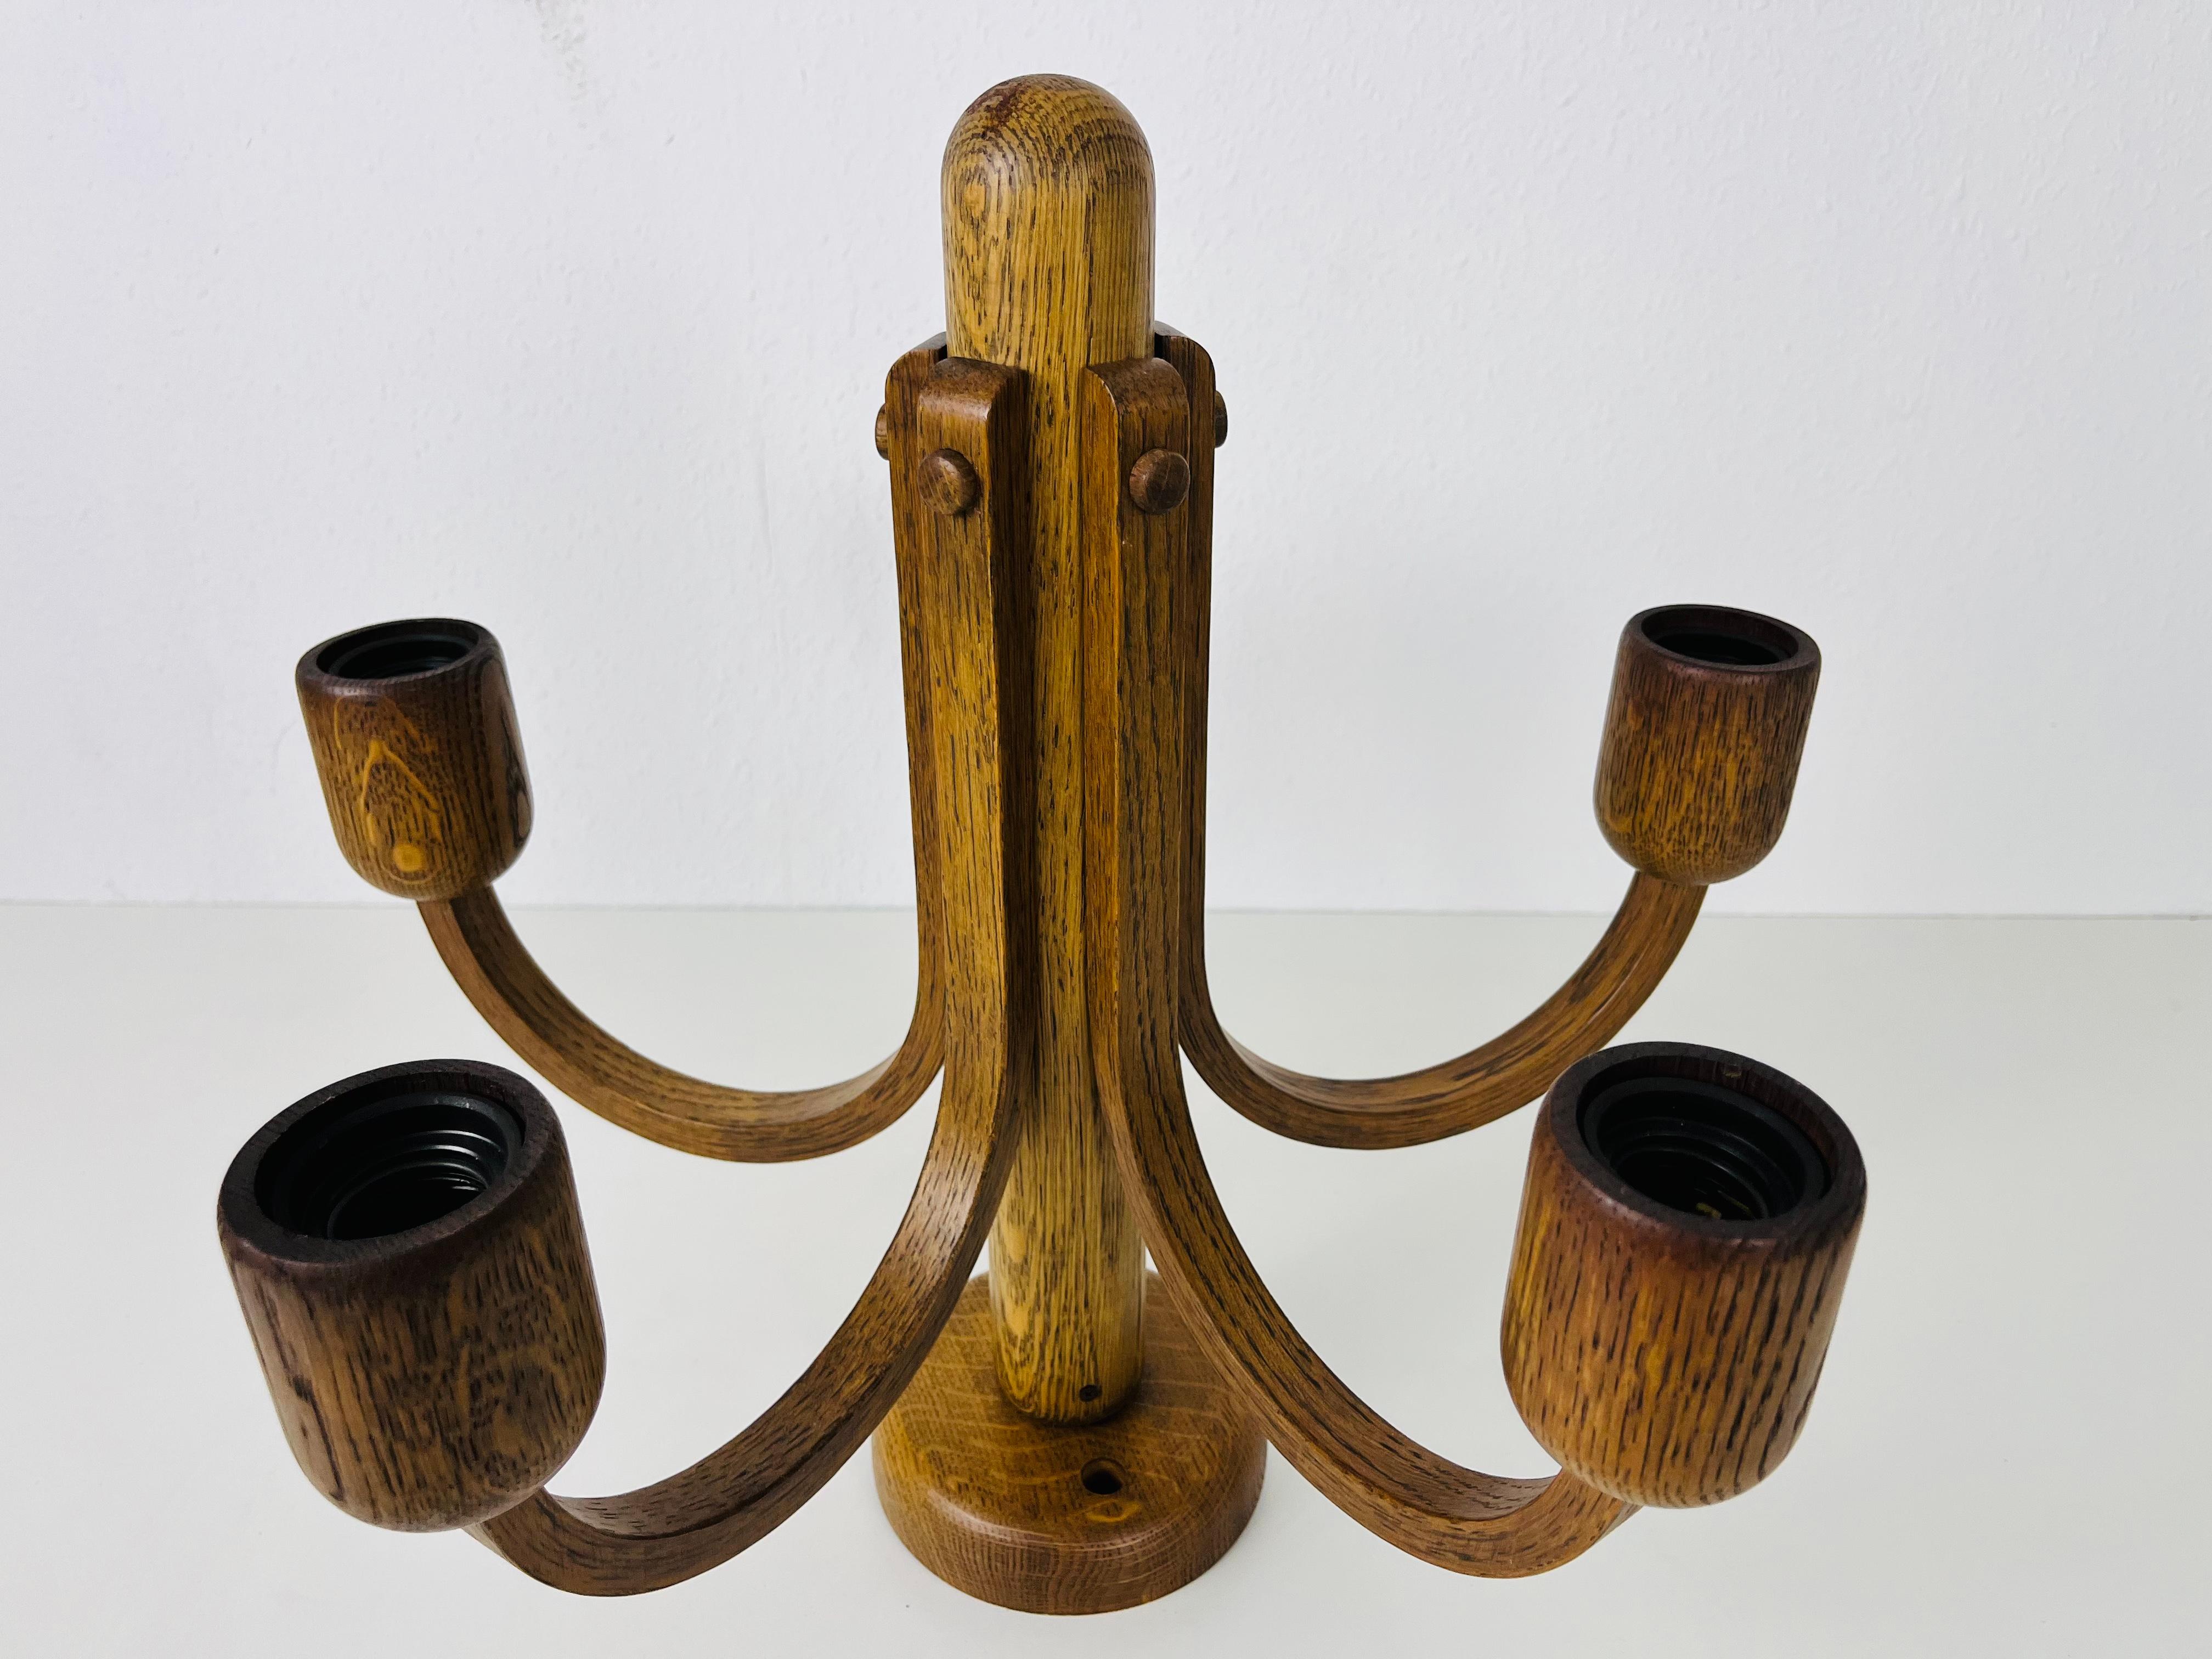 Midcentury Wooden Pendant Lamp with 5 Arms by Domus, 1960s In Good Condition For Sale In Hagenbach, DE